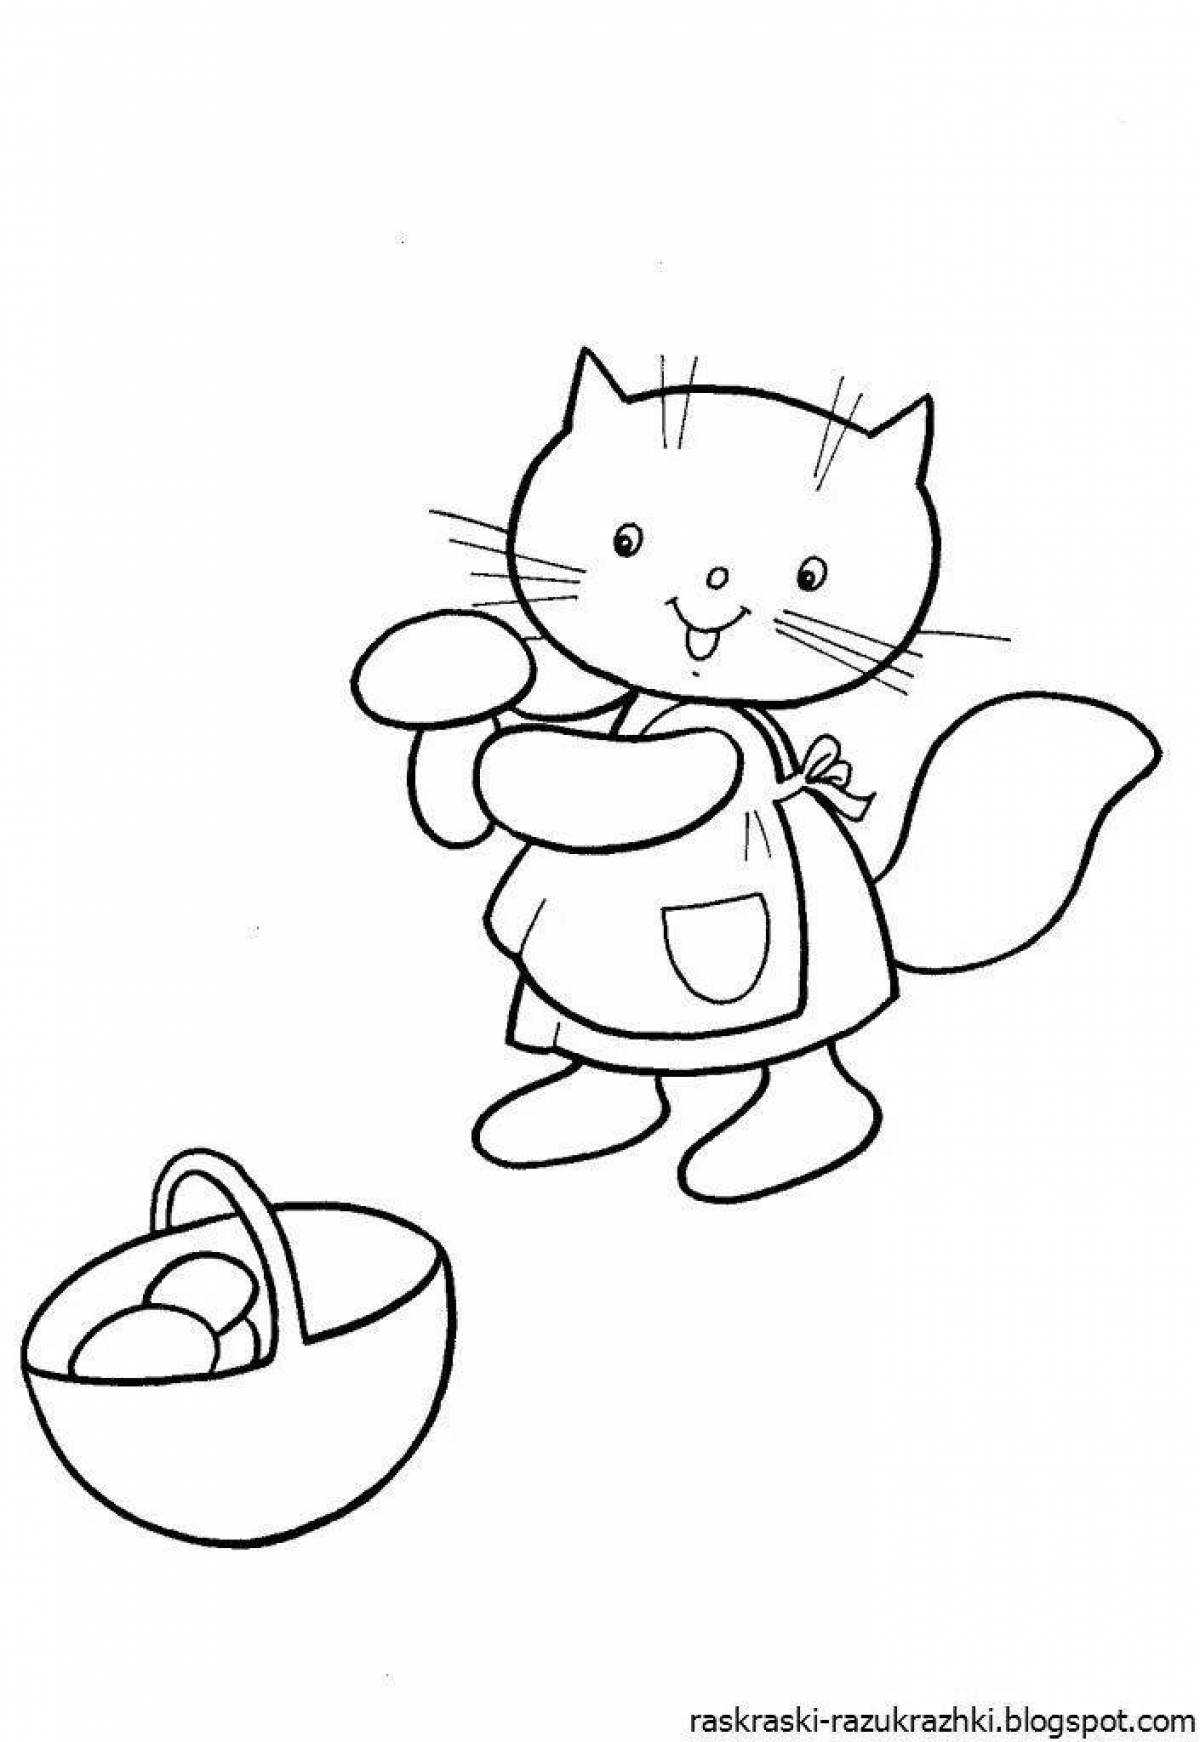 Adorable kitten coloring book for 2-3 year olds